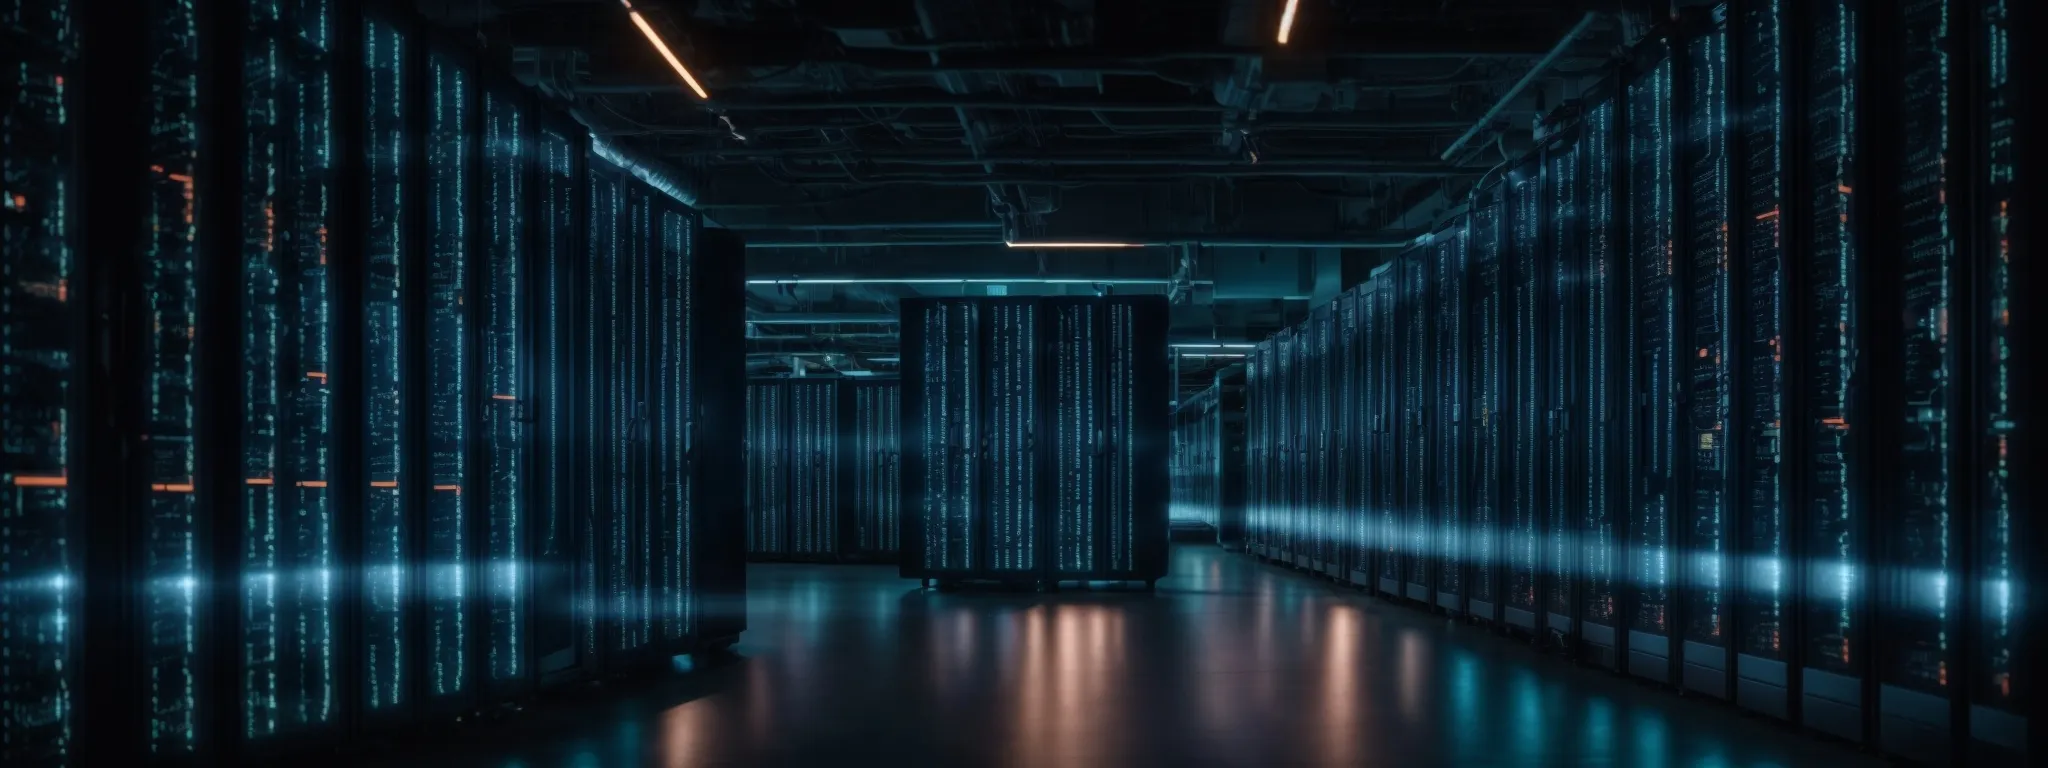 rows of servers in a data center with glowing lights indicating network activity and processing power for advanced data analysis.